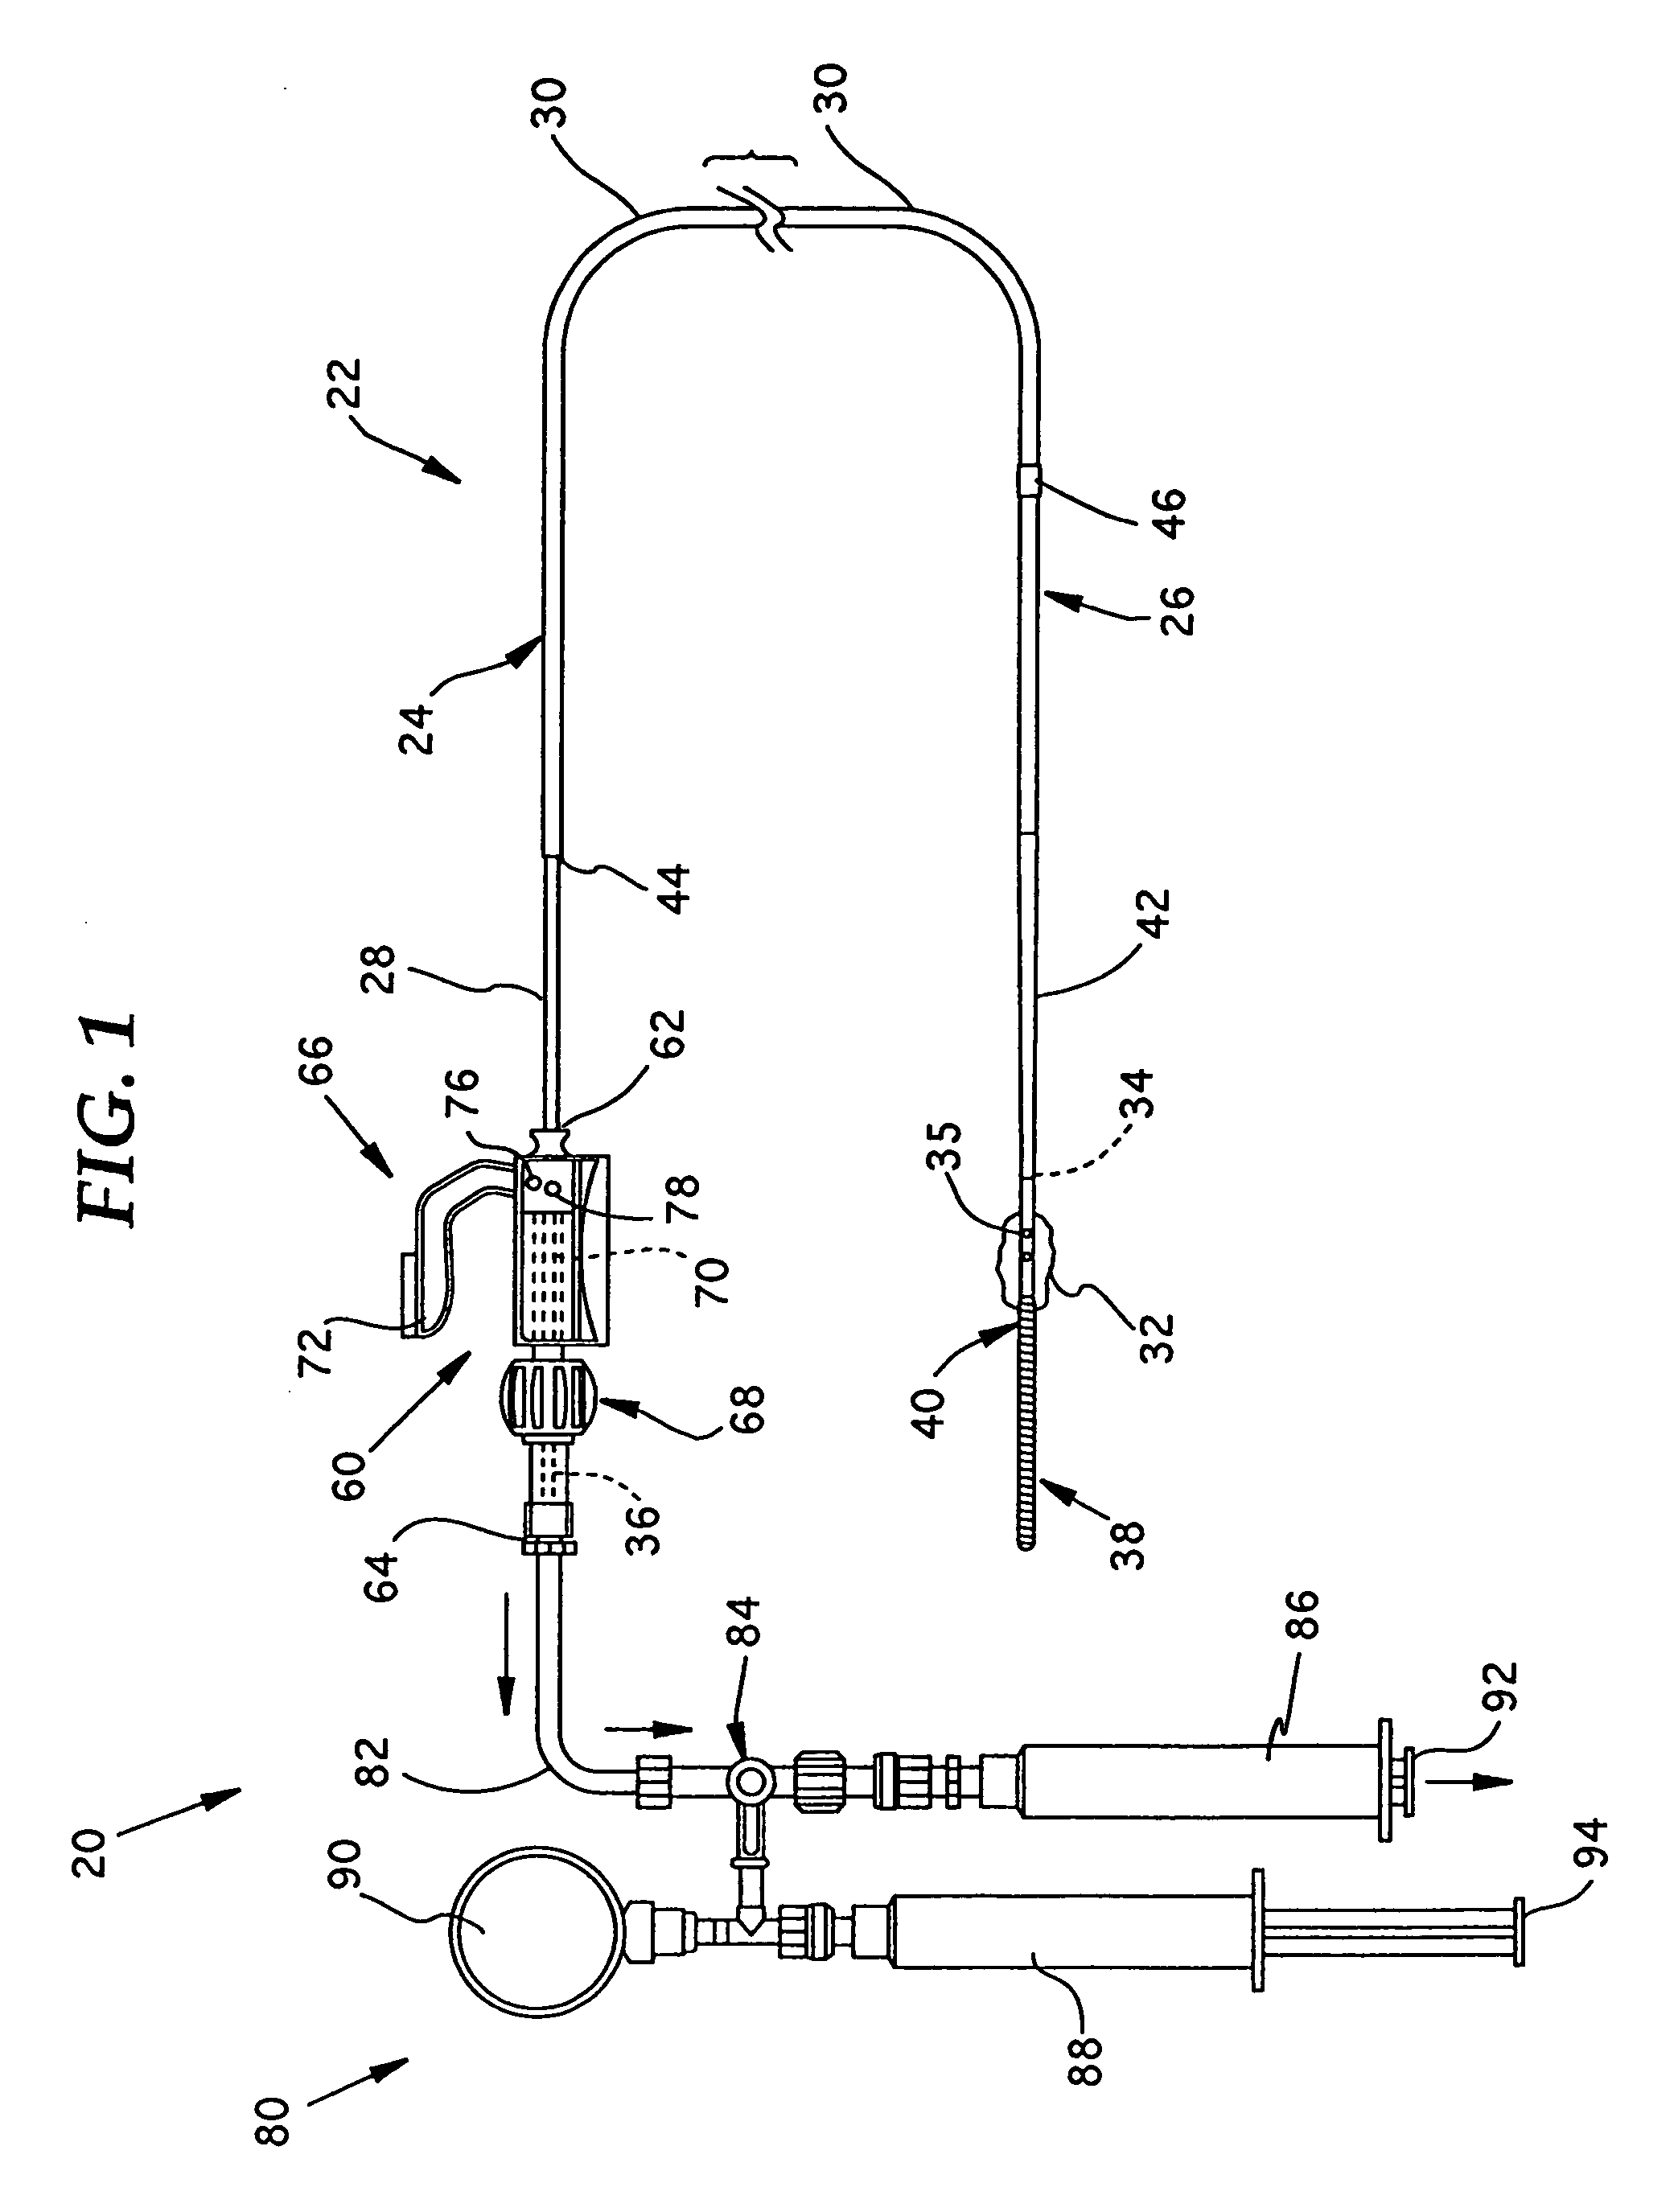 Guidewire having occlusive device and repeatably crimpable proximal end